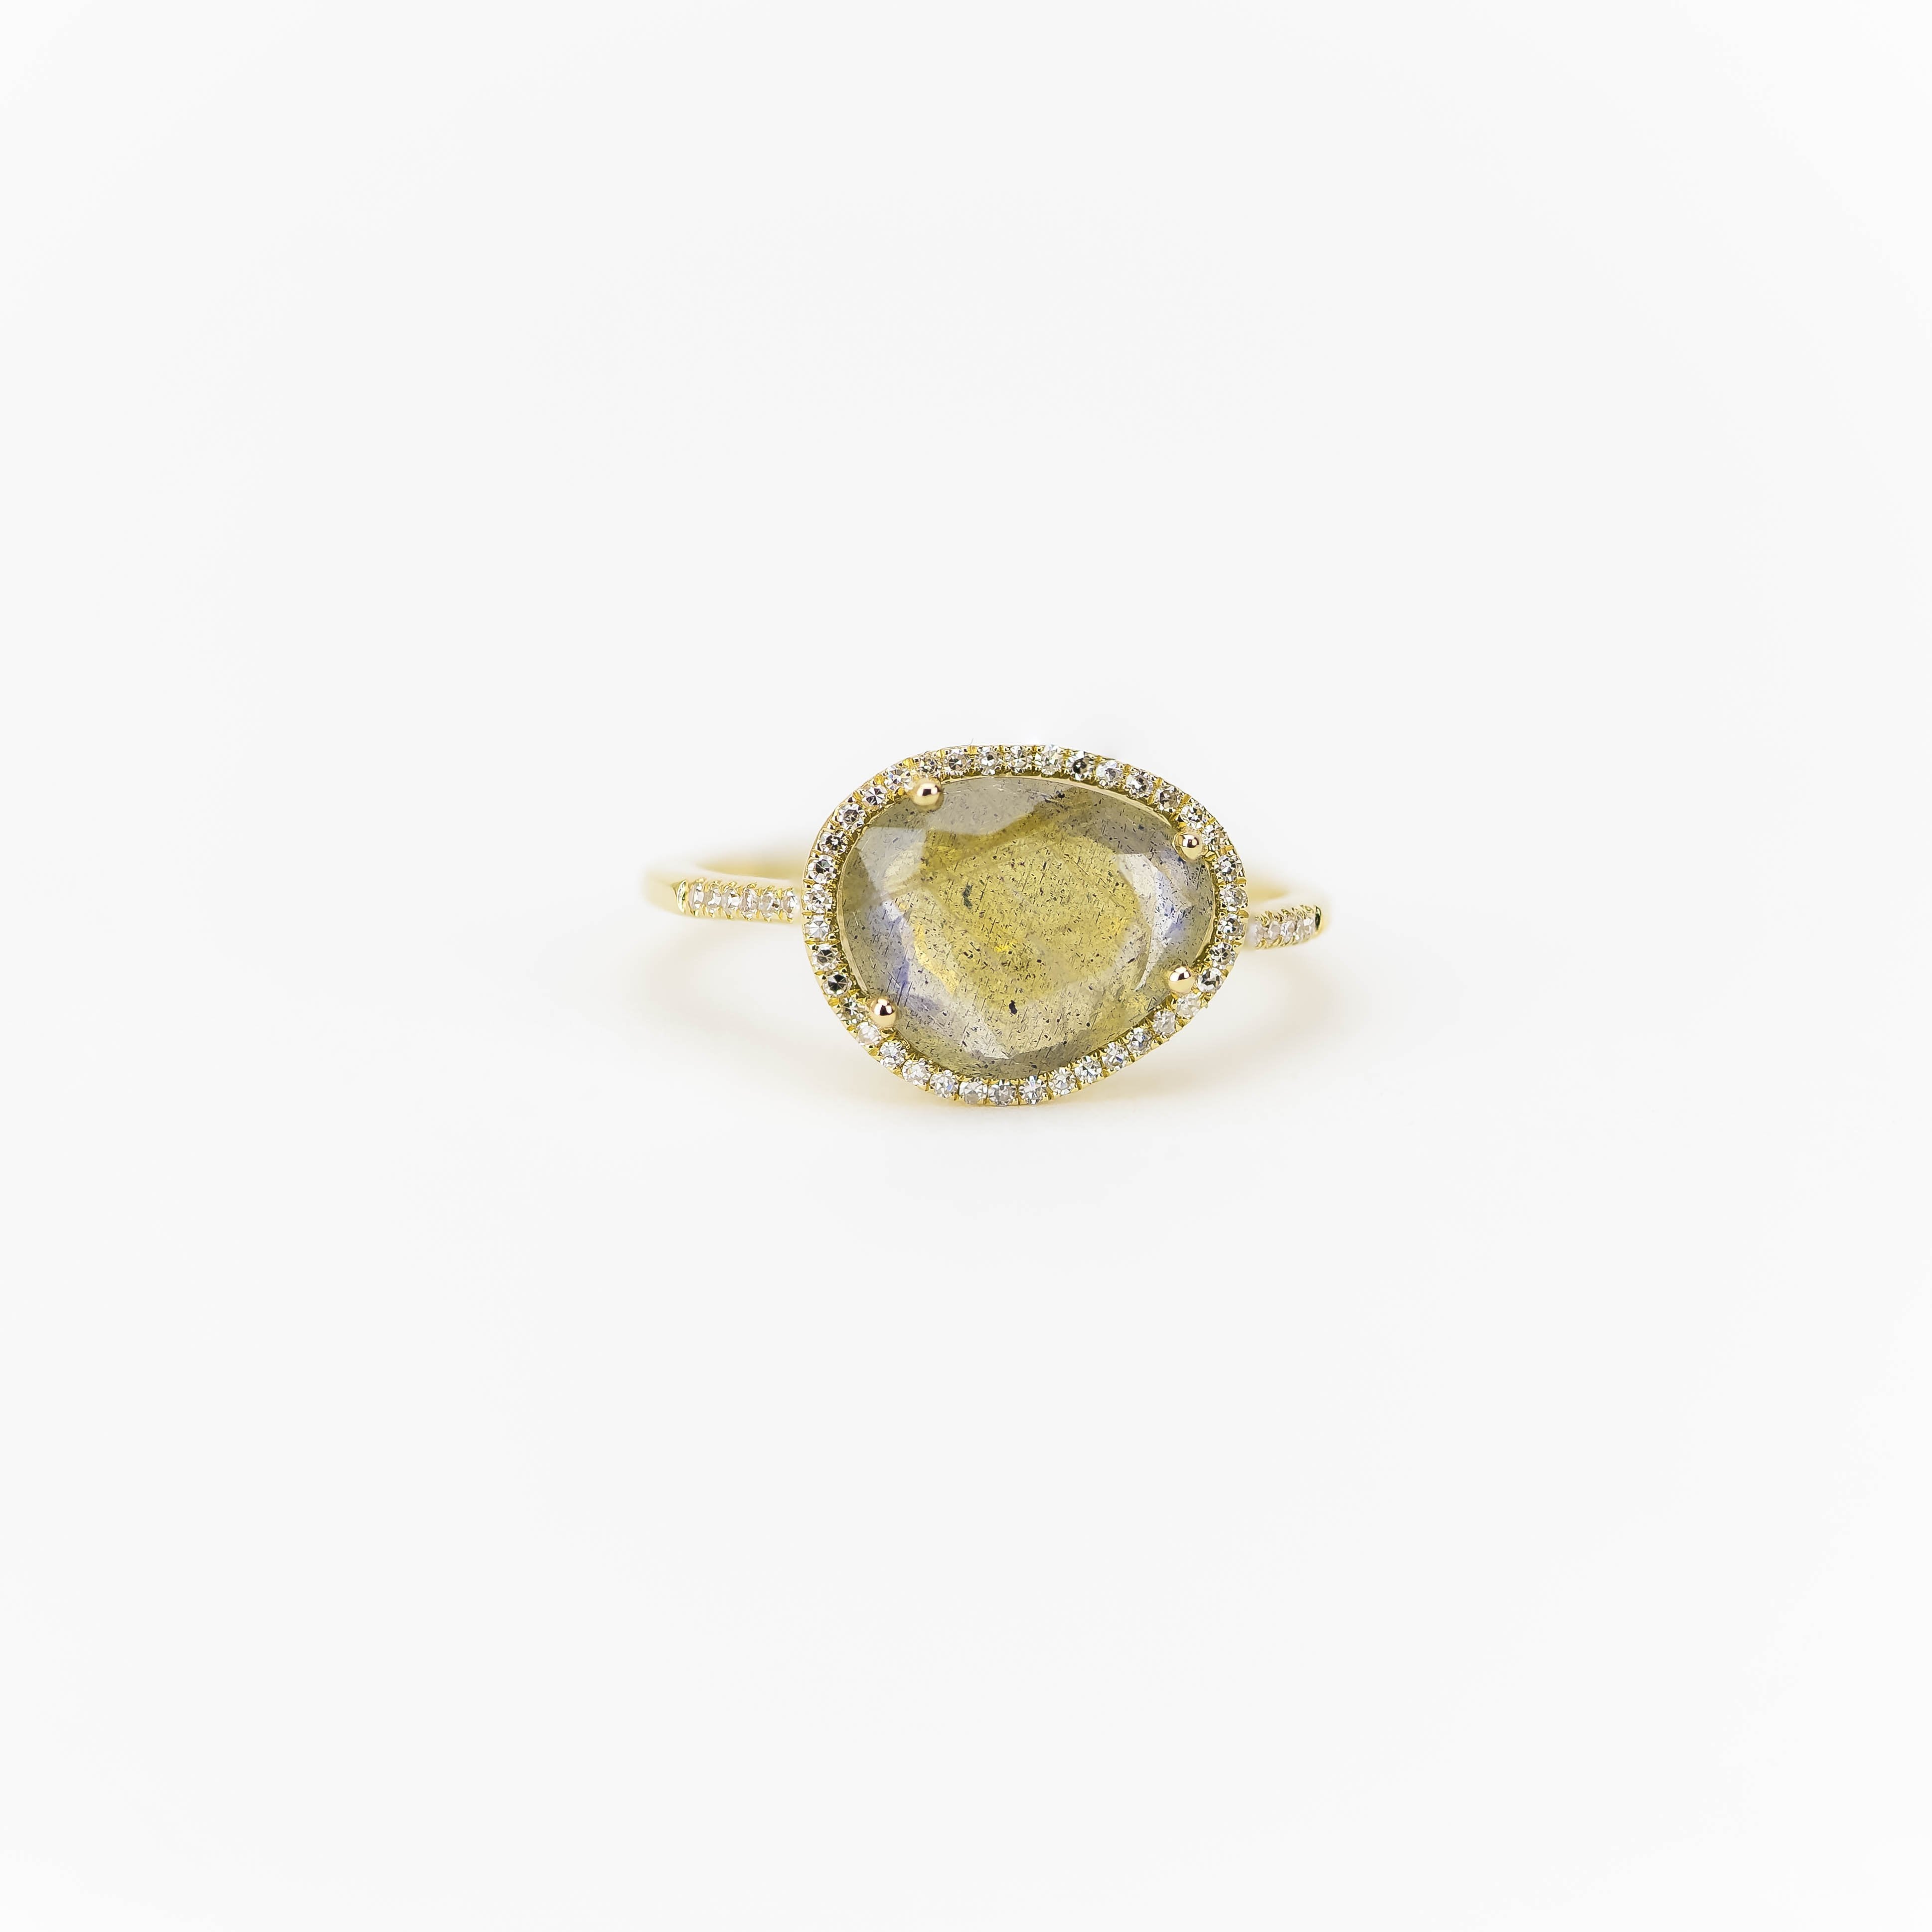 Faceted Labradorite and Diamond Ring by Atheria Jewelry